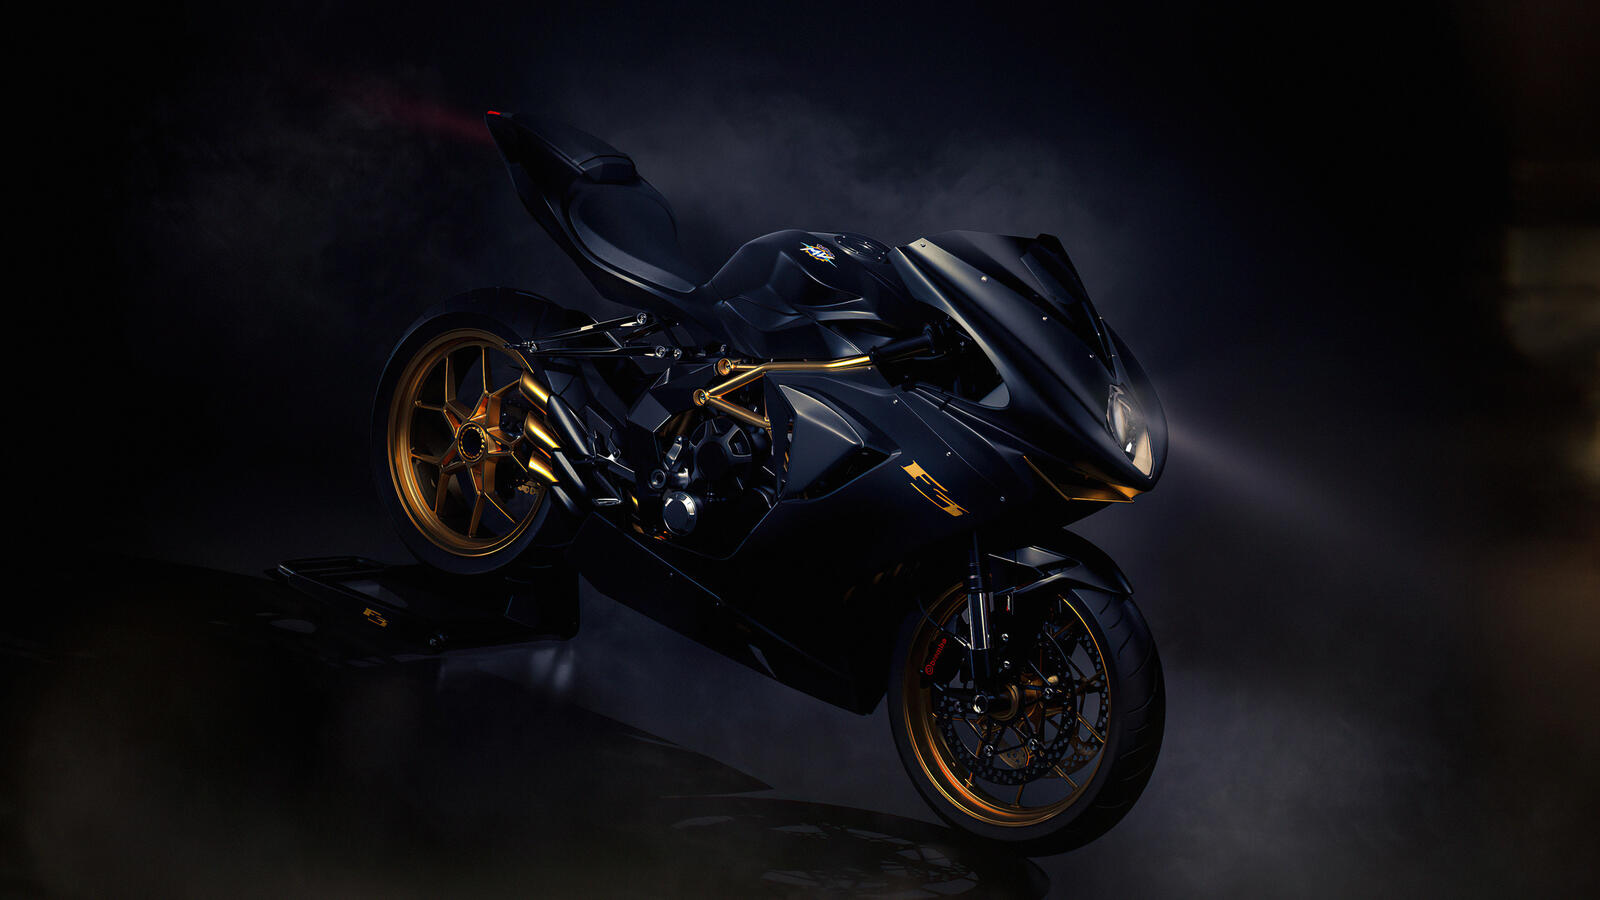 Wallpapers MV Agusta motorcycles black background on the desktop